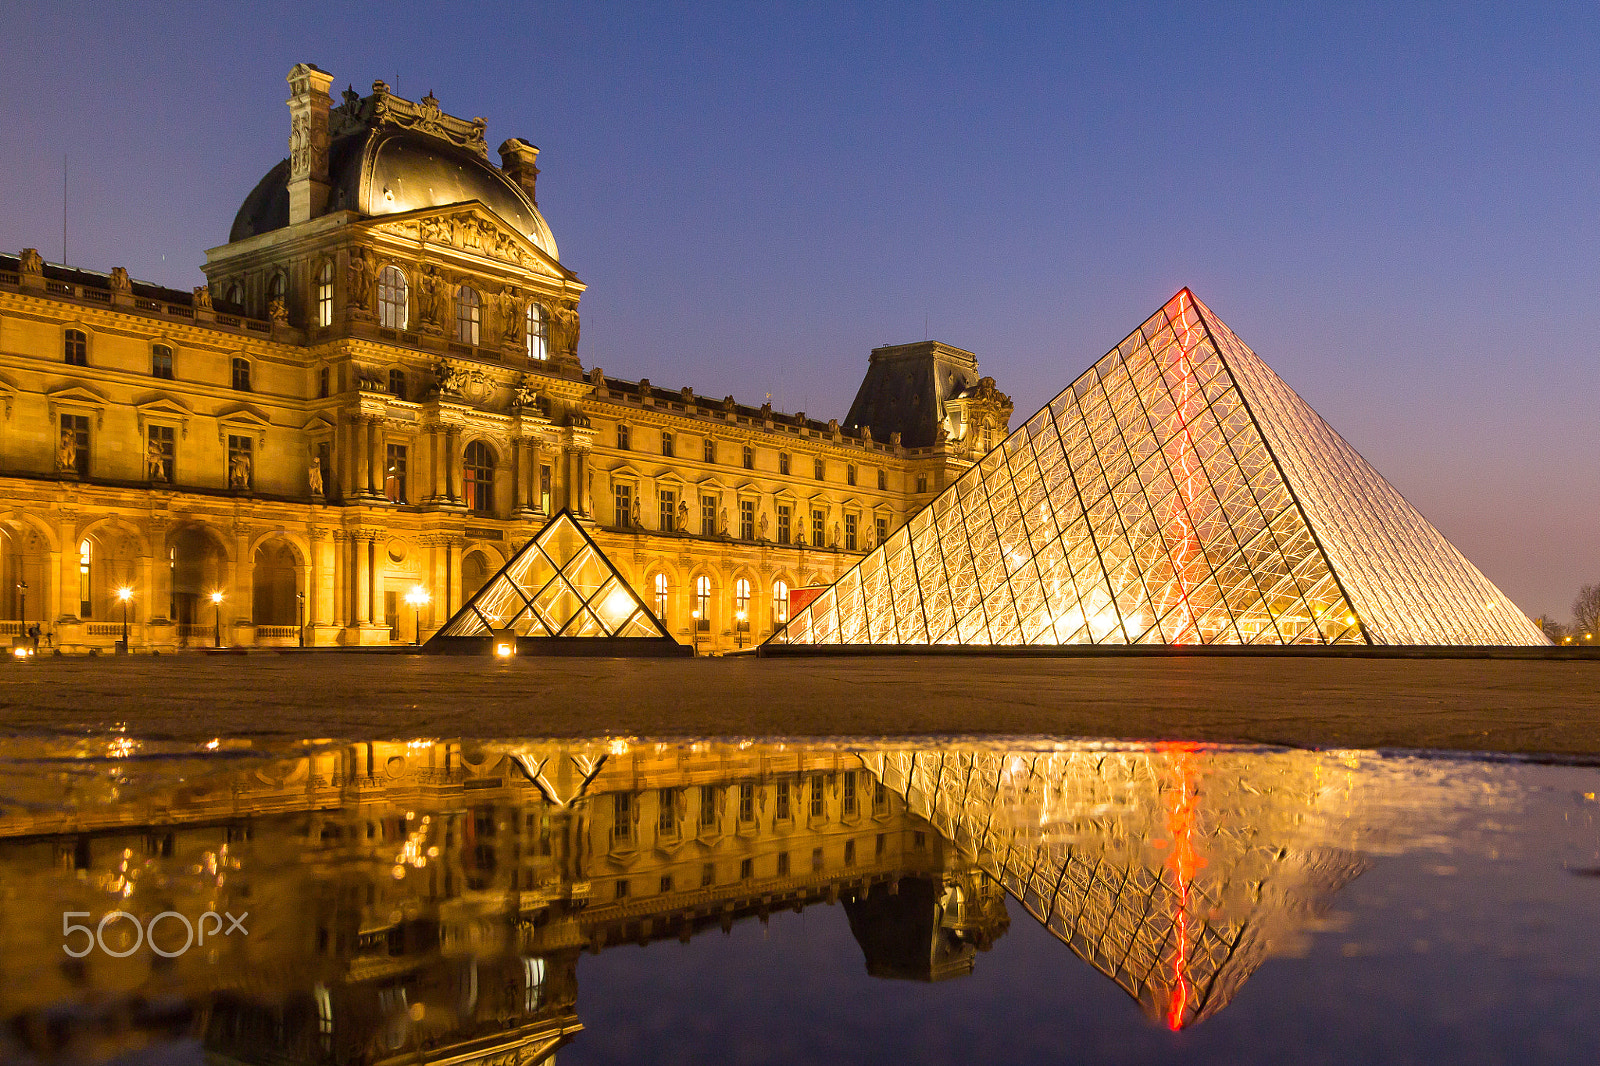 Canon EOS 650D (EOS Rebel T4i / EOS Kiss X6i) + Sigma 17-70mm F2.8-4 DC Macro OS HSM | C sample photo. Reflection of louvre pyramid shines at dusk photography